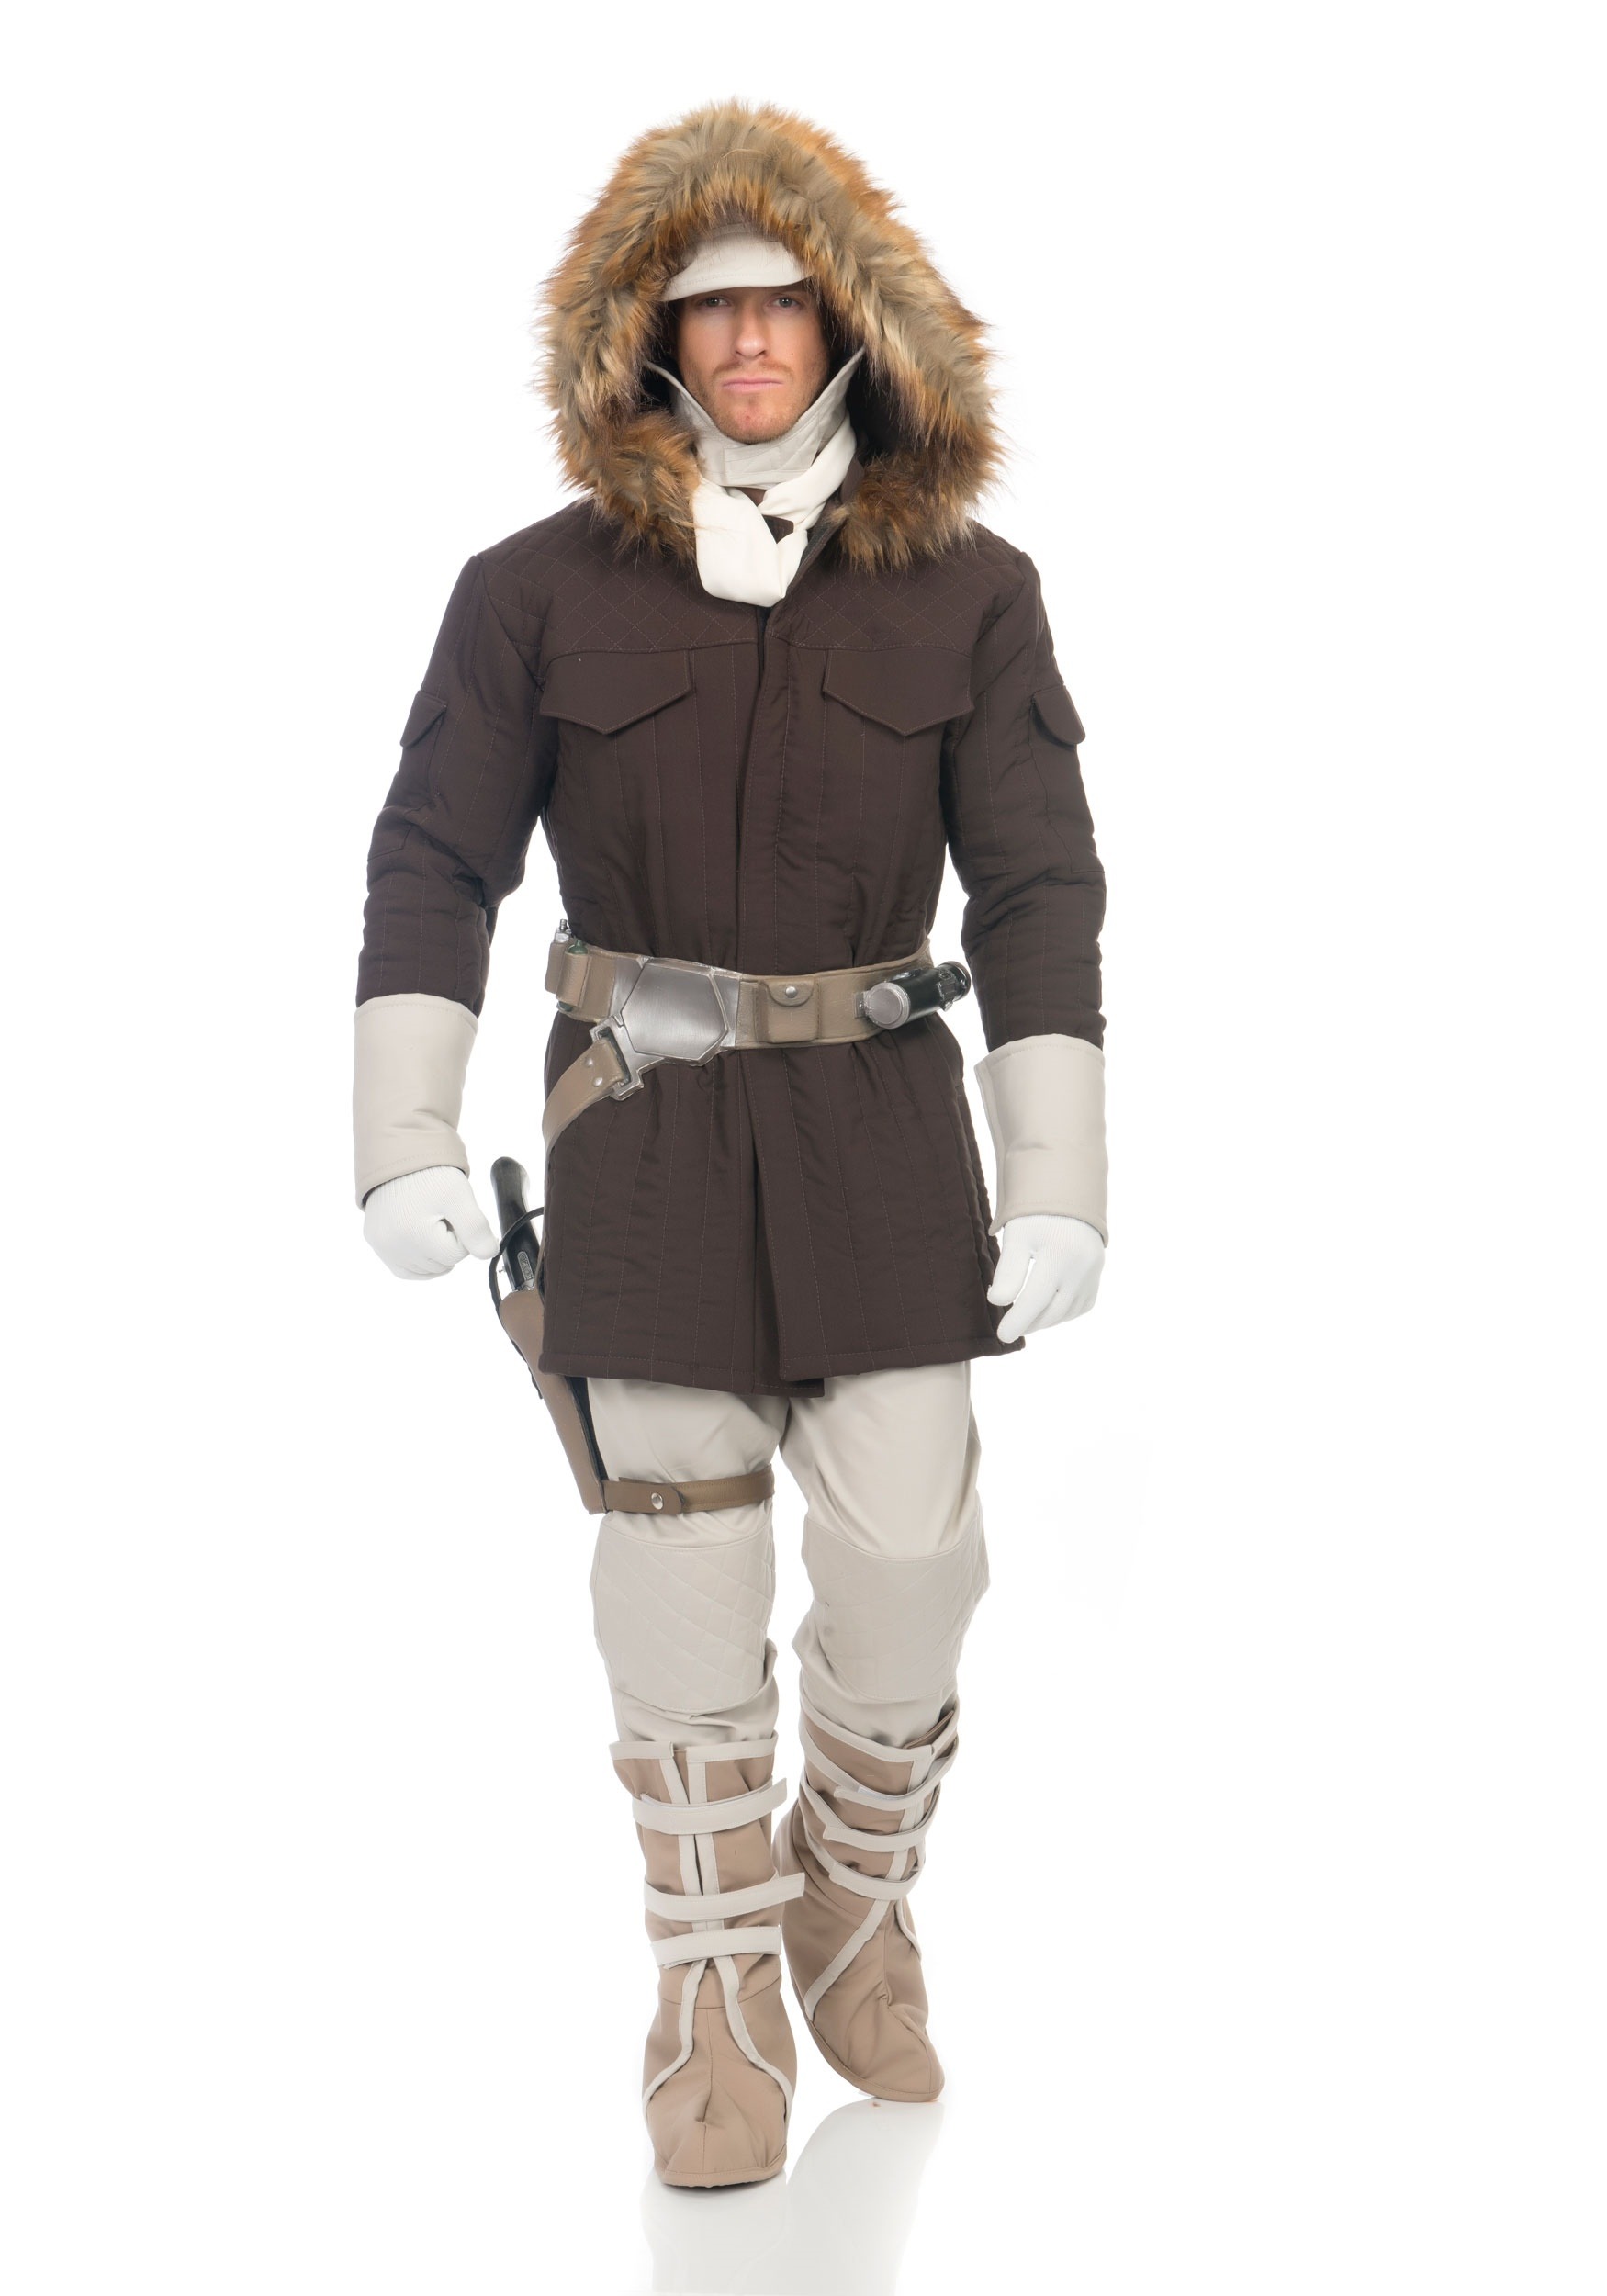 28.) Adult Han Solo Movie Quality Costume